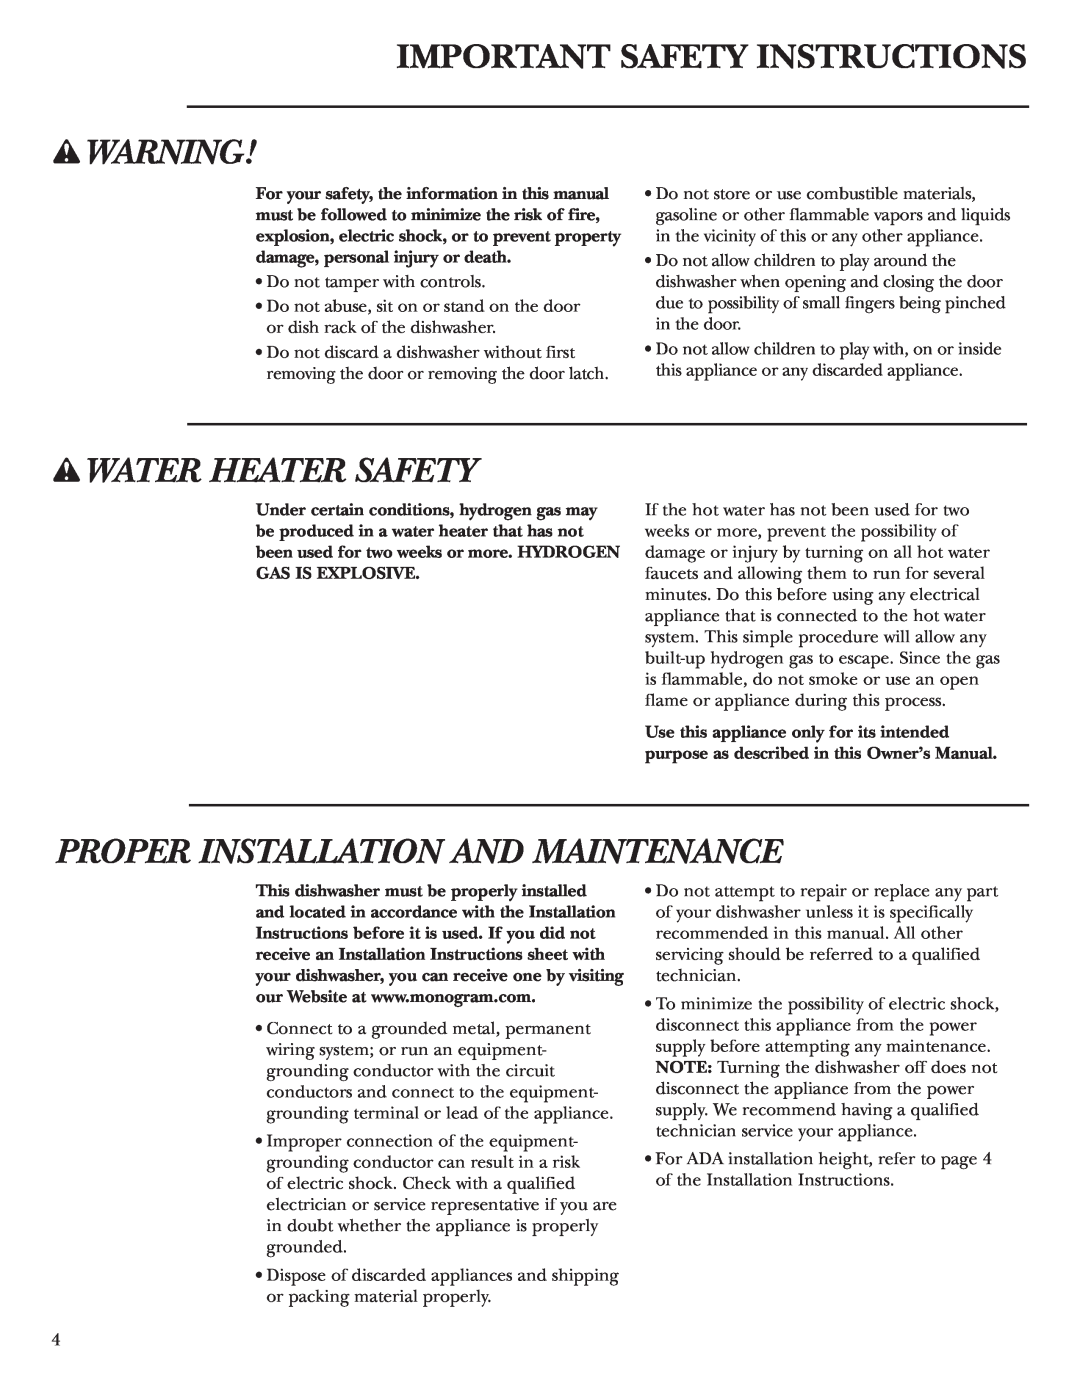 GE ZBD1800 Important Safety Instructions, w WARNING, w WATER HEATER SAFETY, Proper Installation And Maintenance 